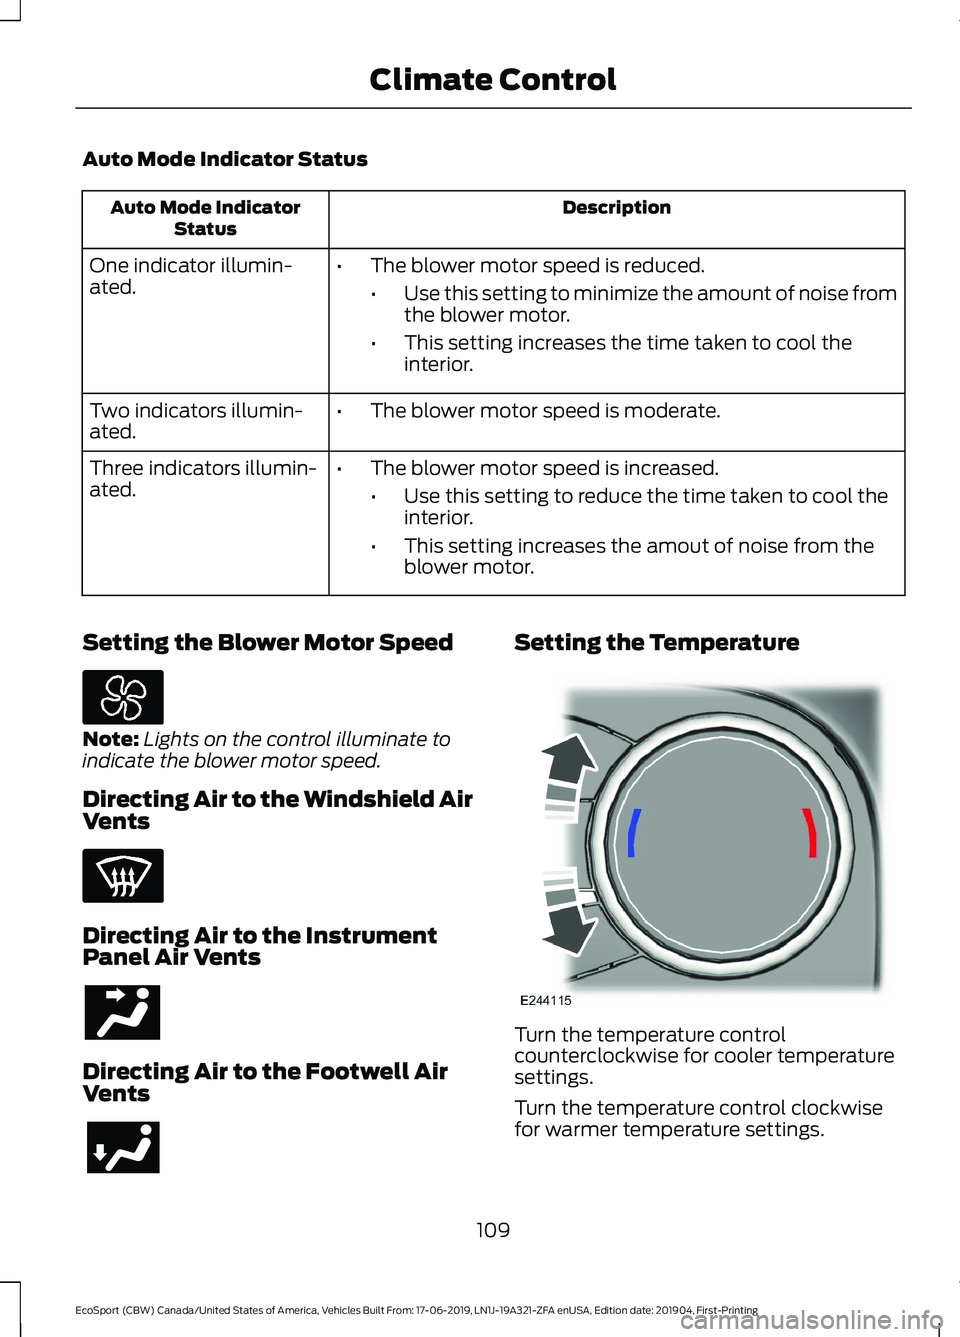 FORD ECOSPORT 2020  Owners Manual Auto Mode Indicator Status
DescriptionAuto Mode IndicatorStatus
One indicator illumin-ated.•The blower motor speed is reduced.
•Use this setting to minimize the amount of noise fromthe blower moto